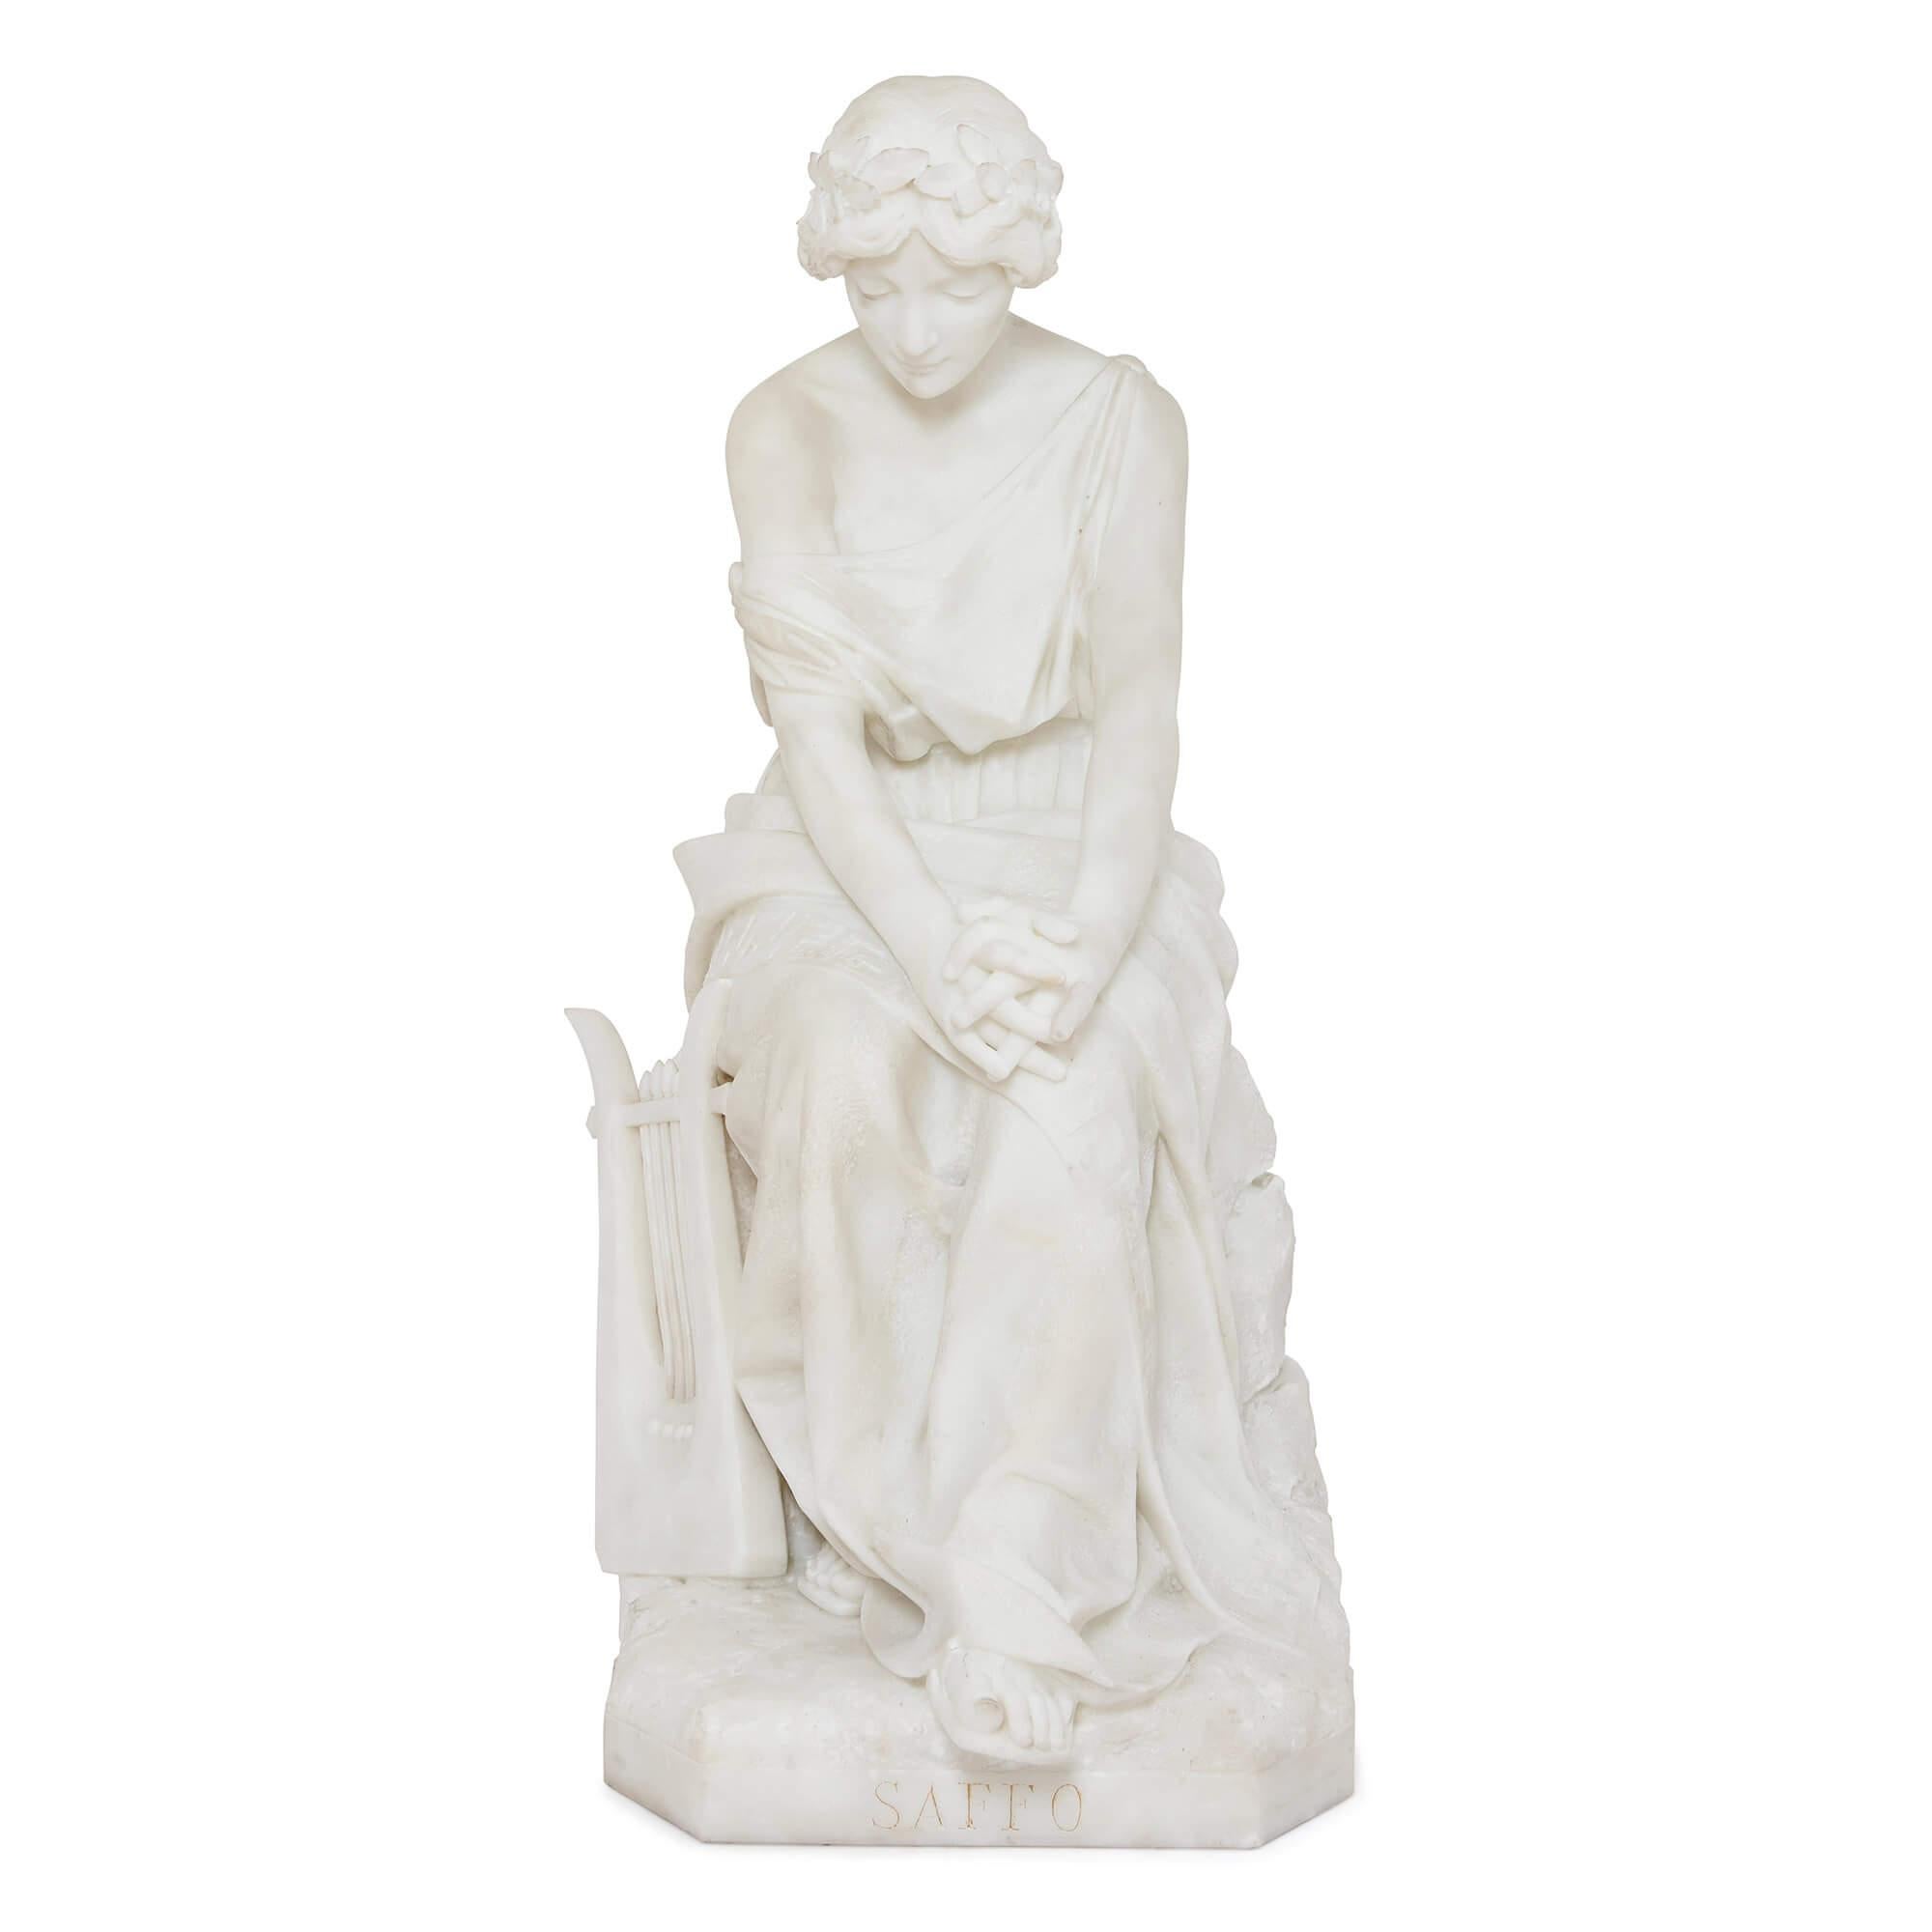 Neoclassical Style Italian Marble Sculpture of Seated Sappho